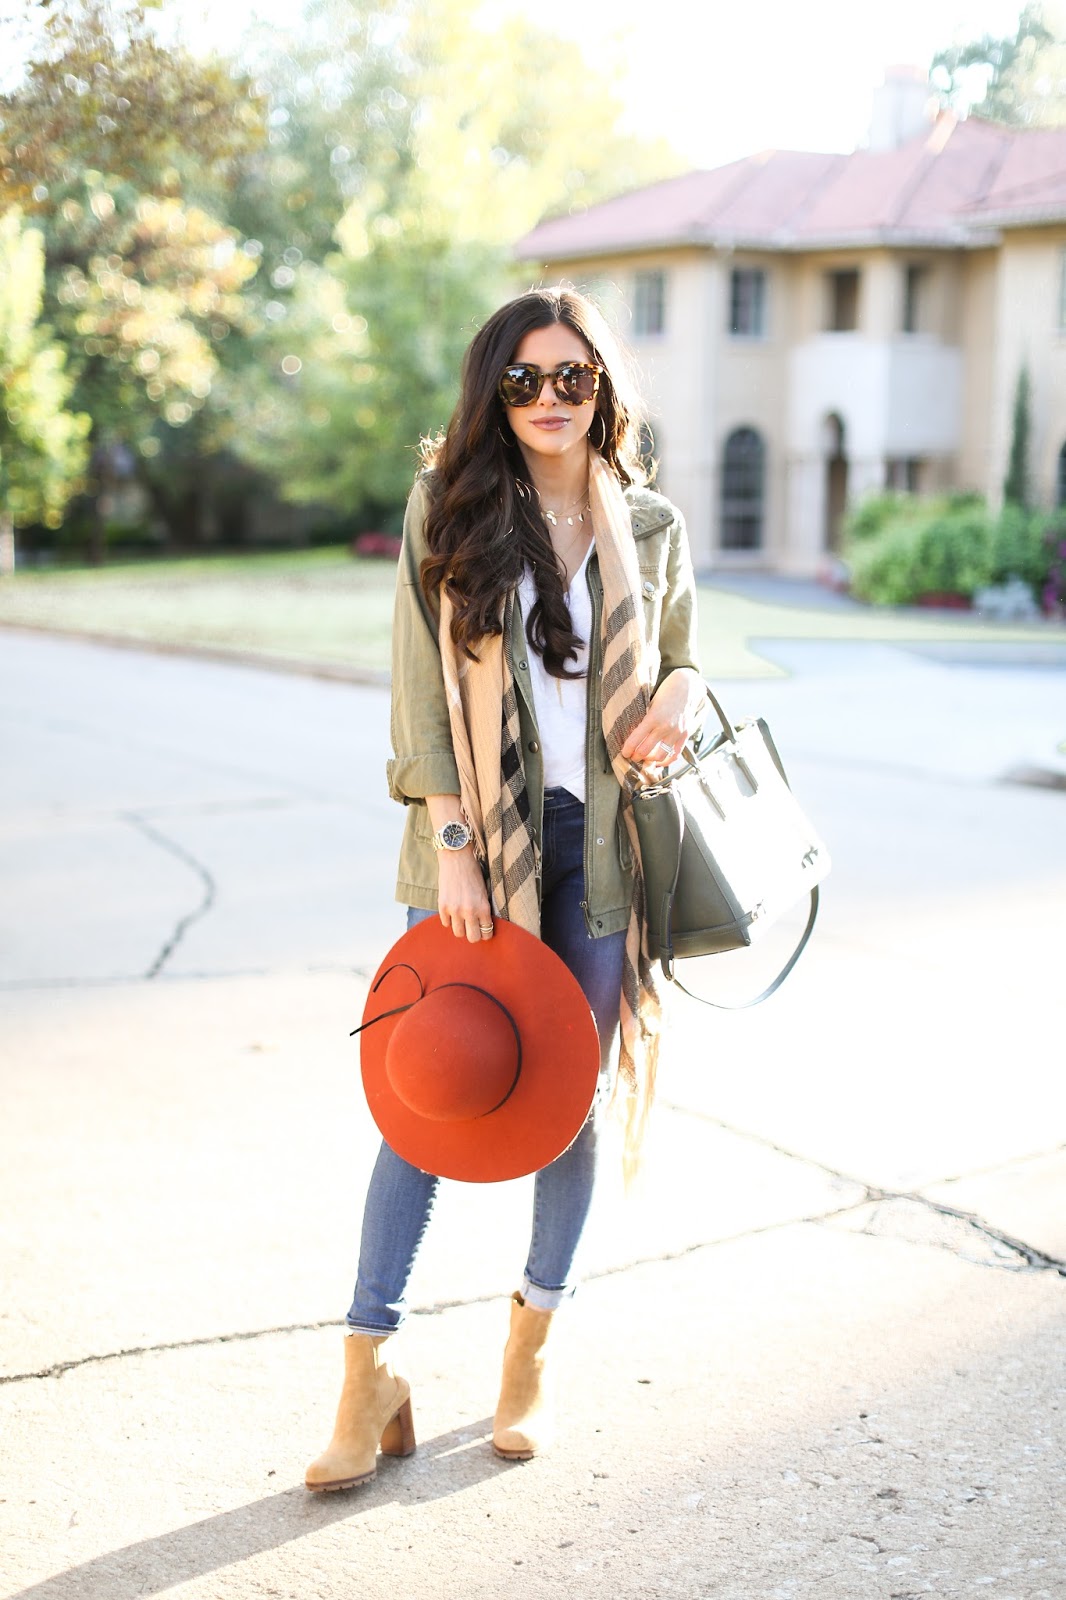 Styling a Utility Jacket | The Sweetest Thing